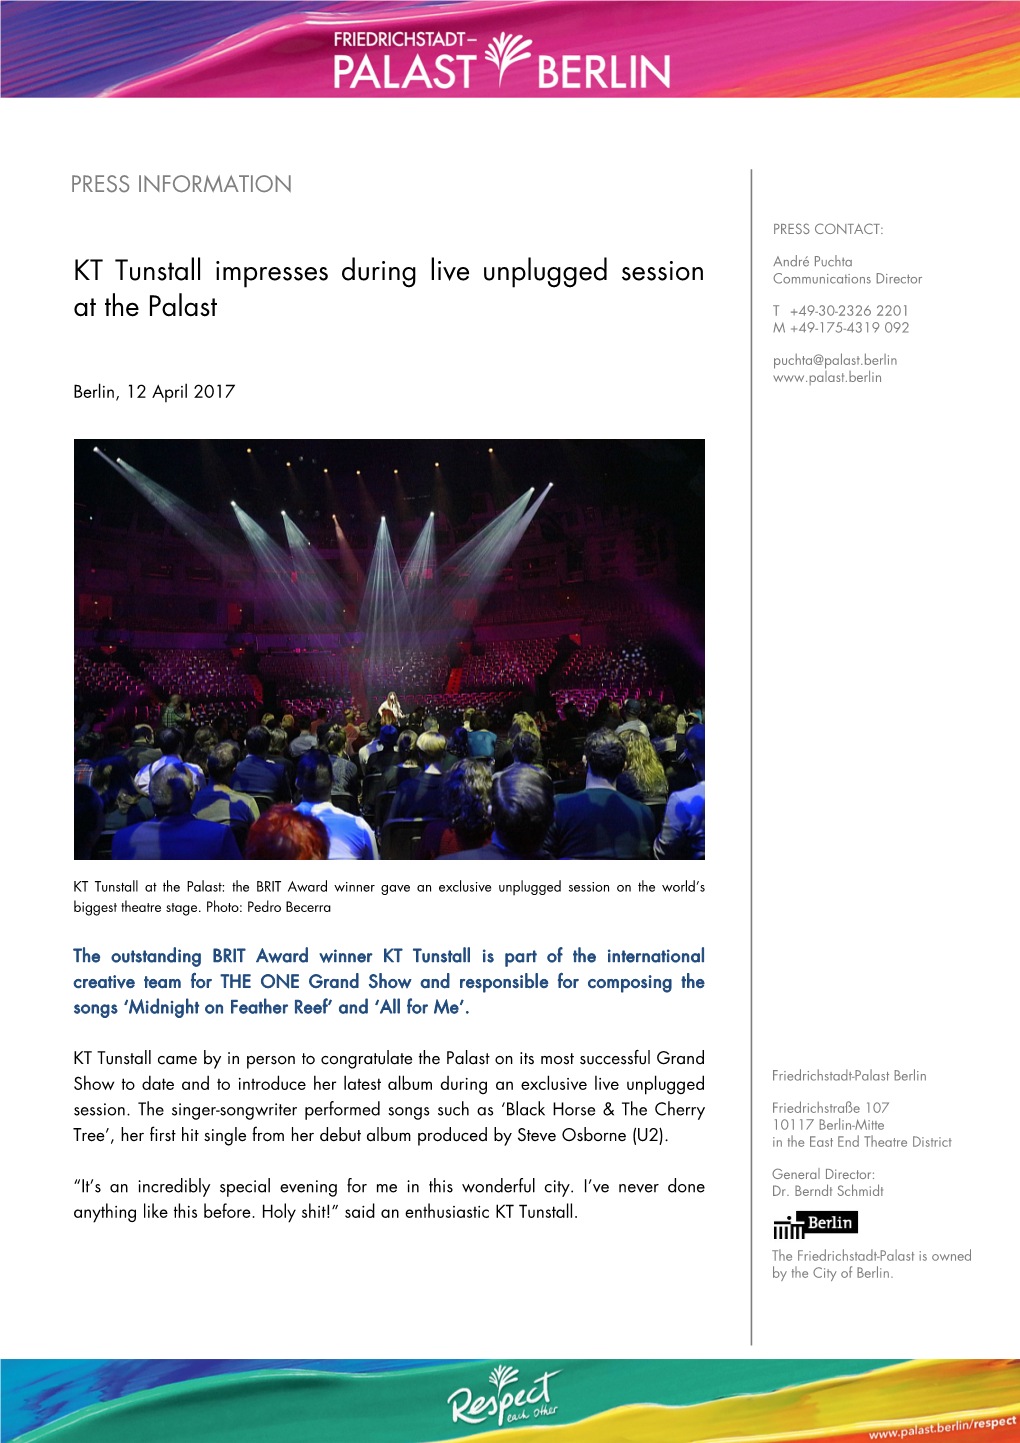 KT Tunstall Impresses During Live Unplugged Session at the Palast